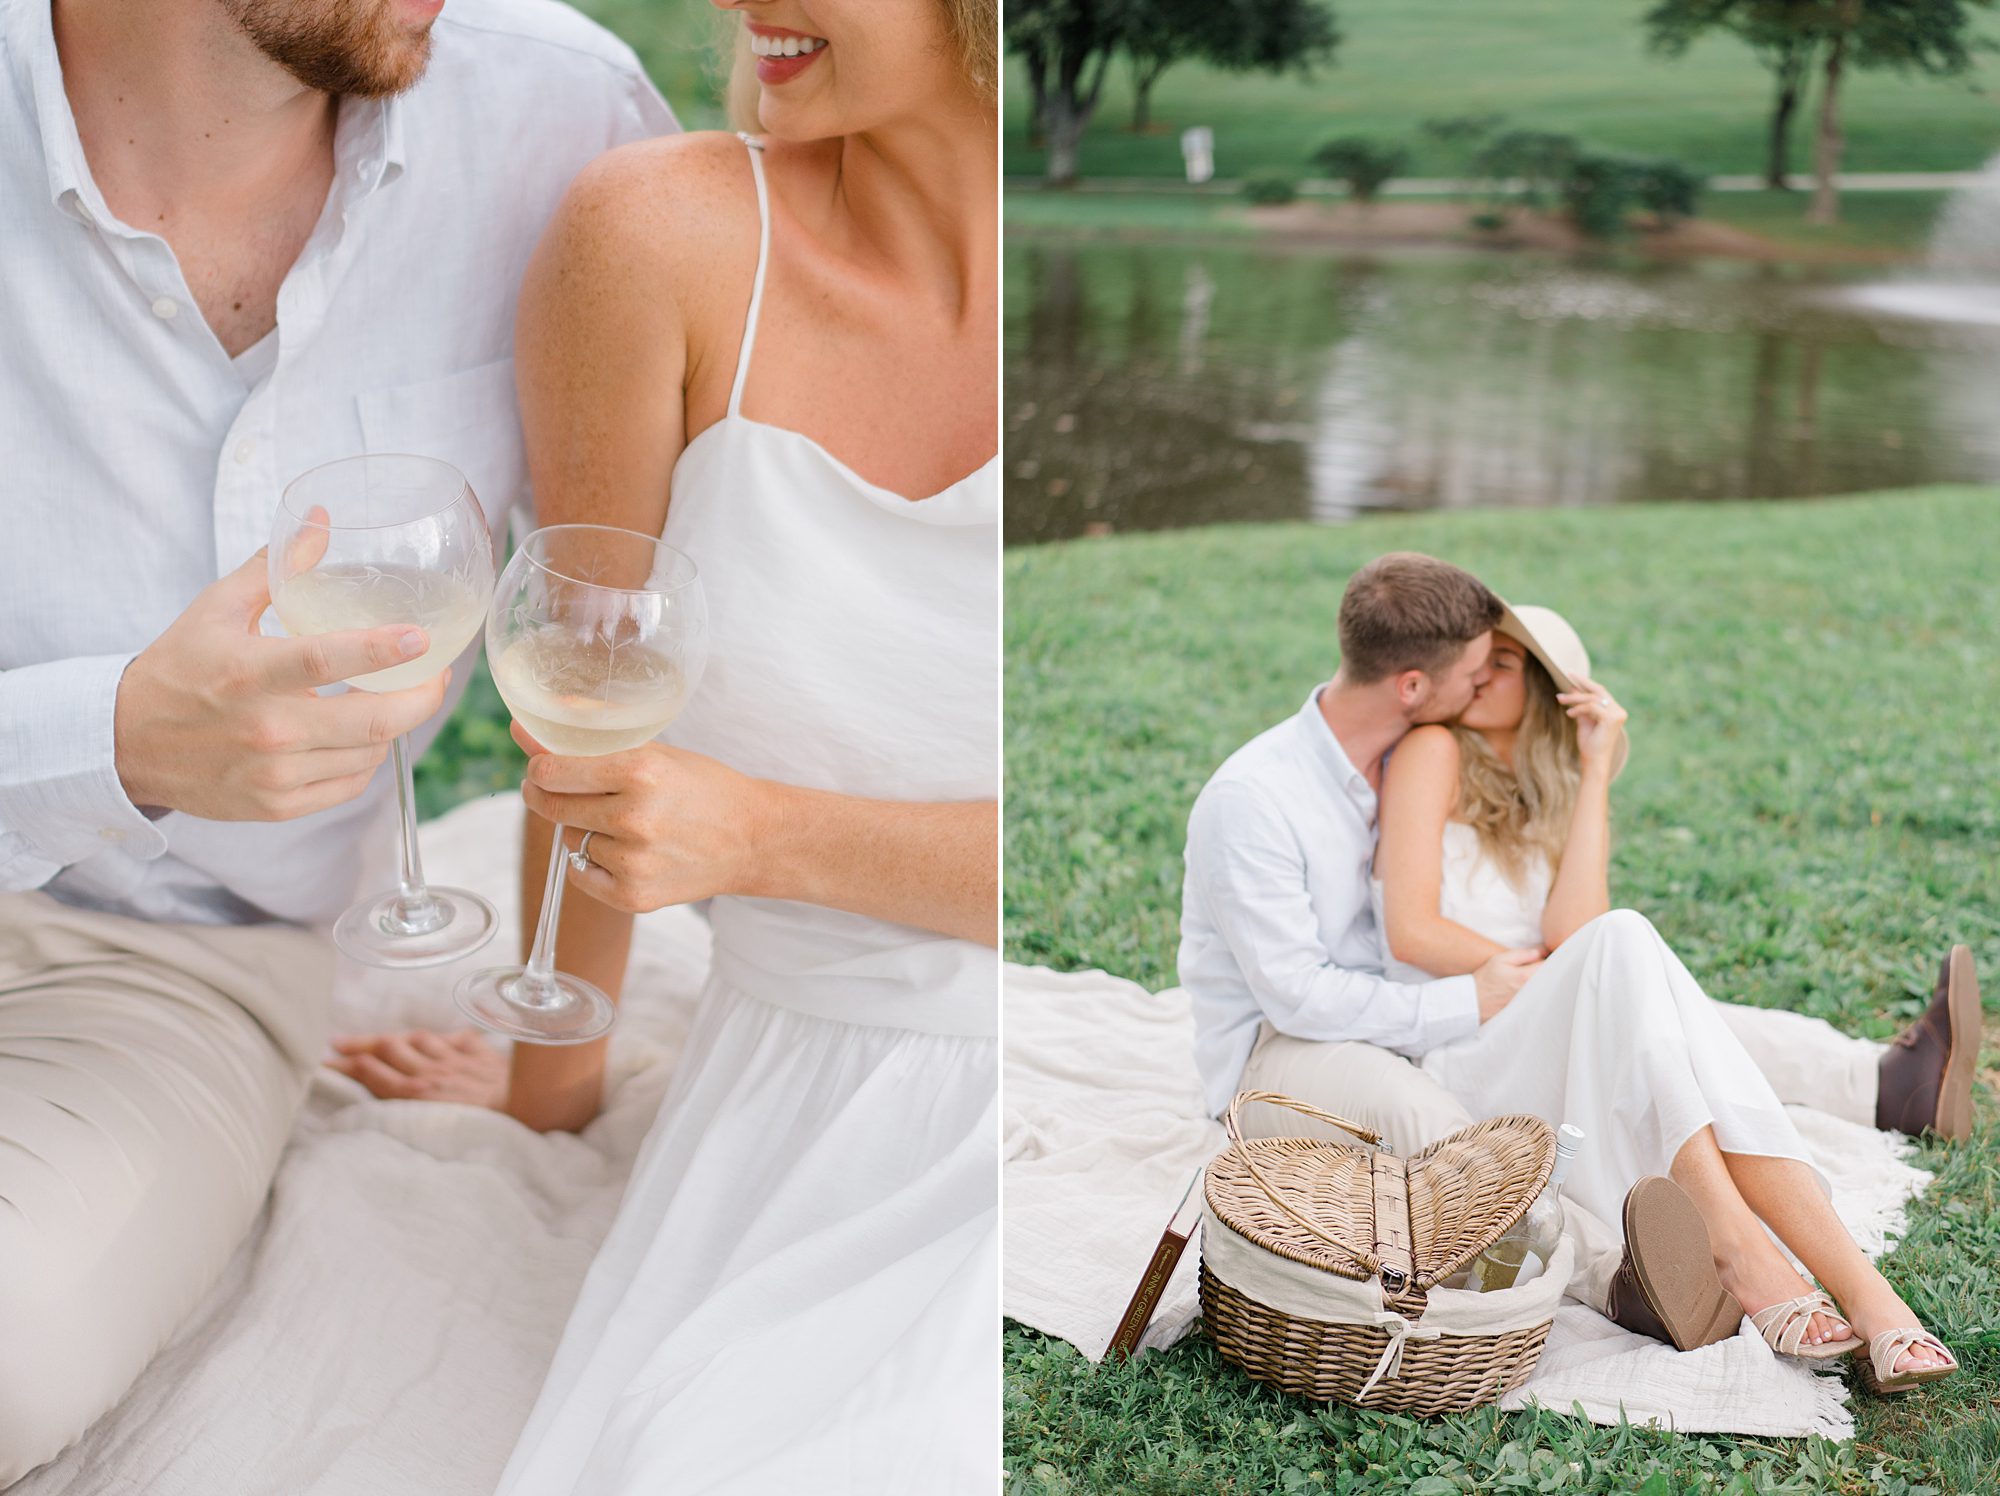 couple share romantic picnic during Engagement Session at The Willows 